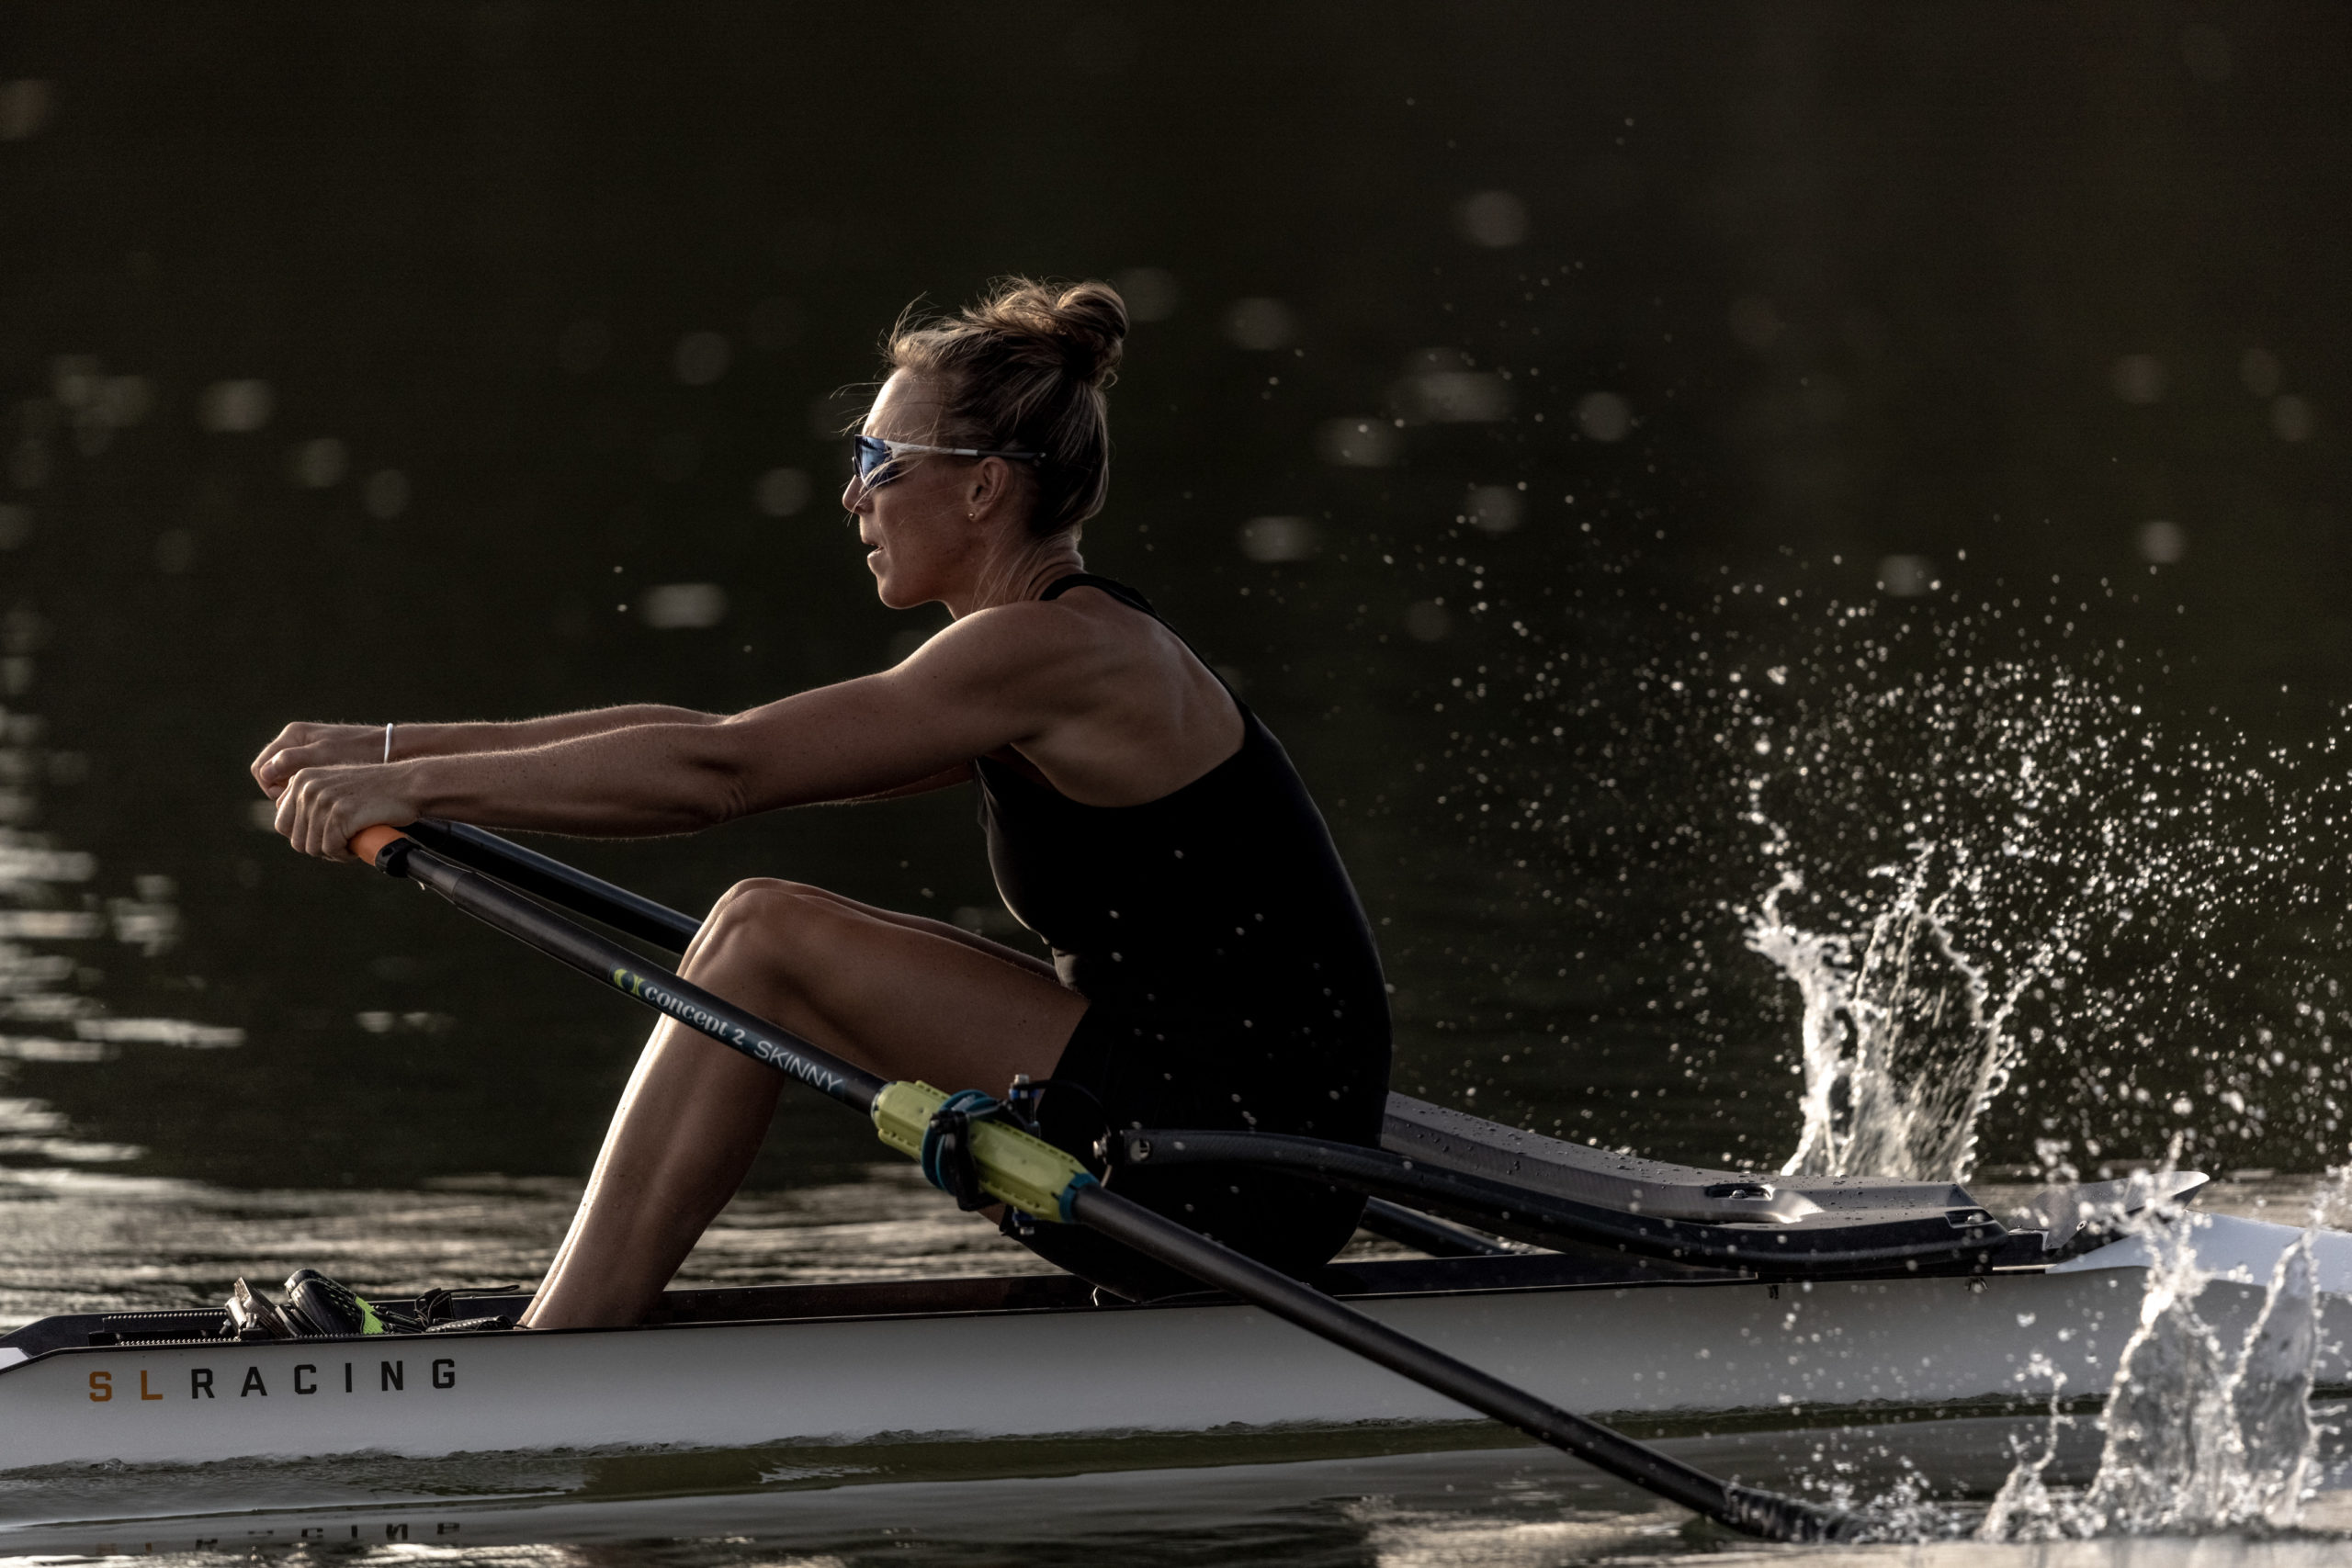 Olympic champion rower Emma Twigg on the Clive River in an SL Racing boat with new Carbon Wing.